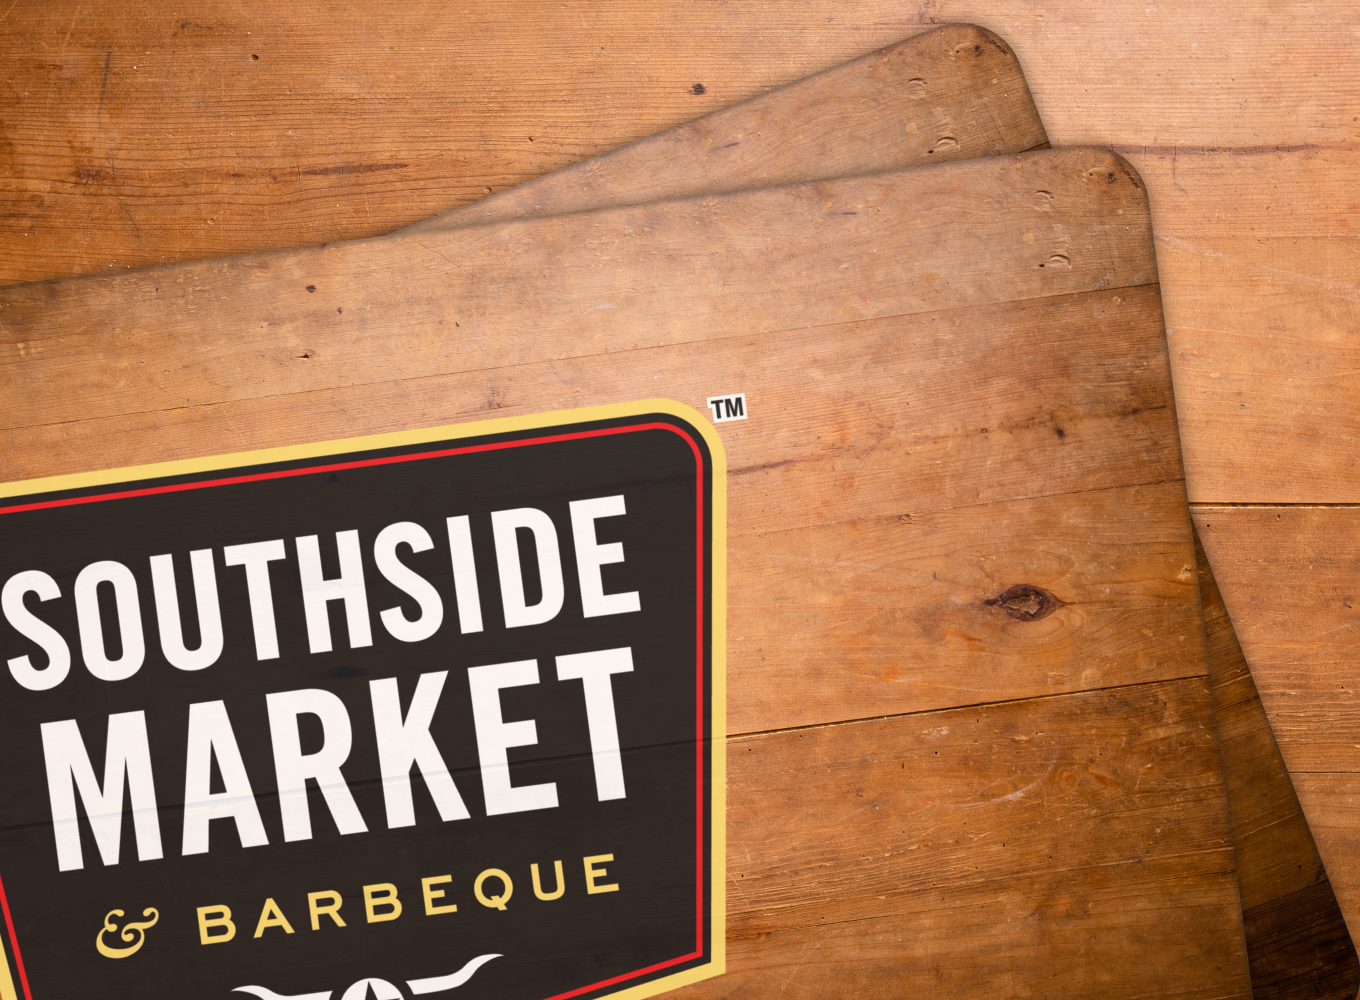 Start a career in BBQ! At Southside Market & Barbeque